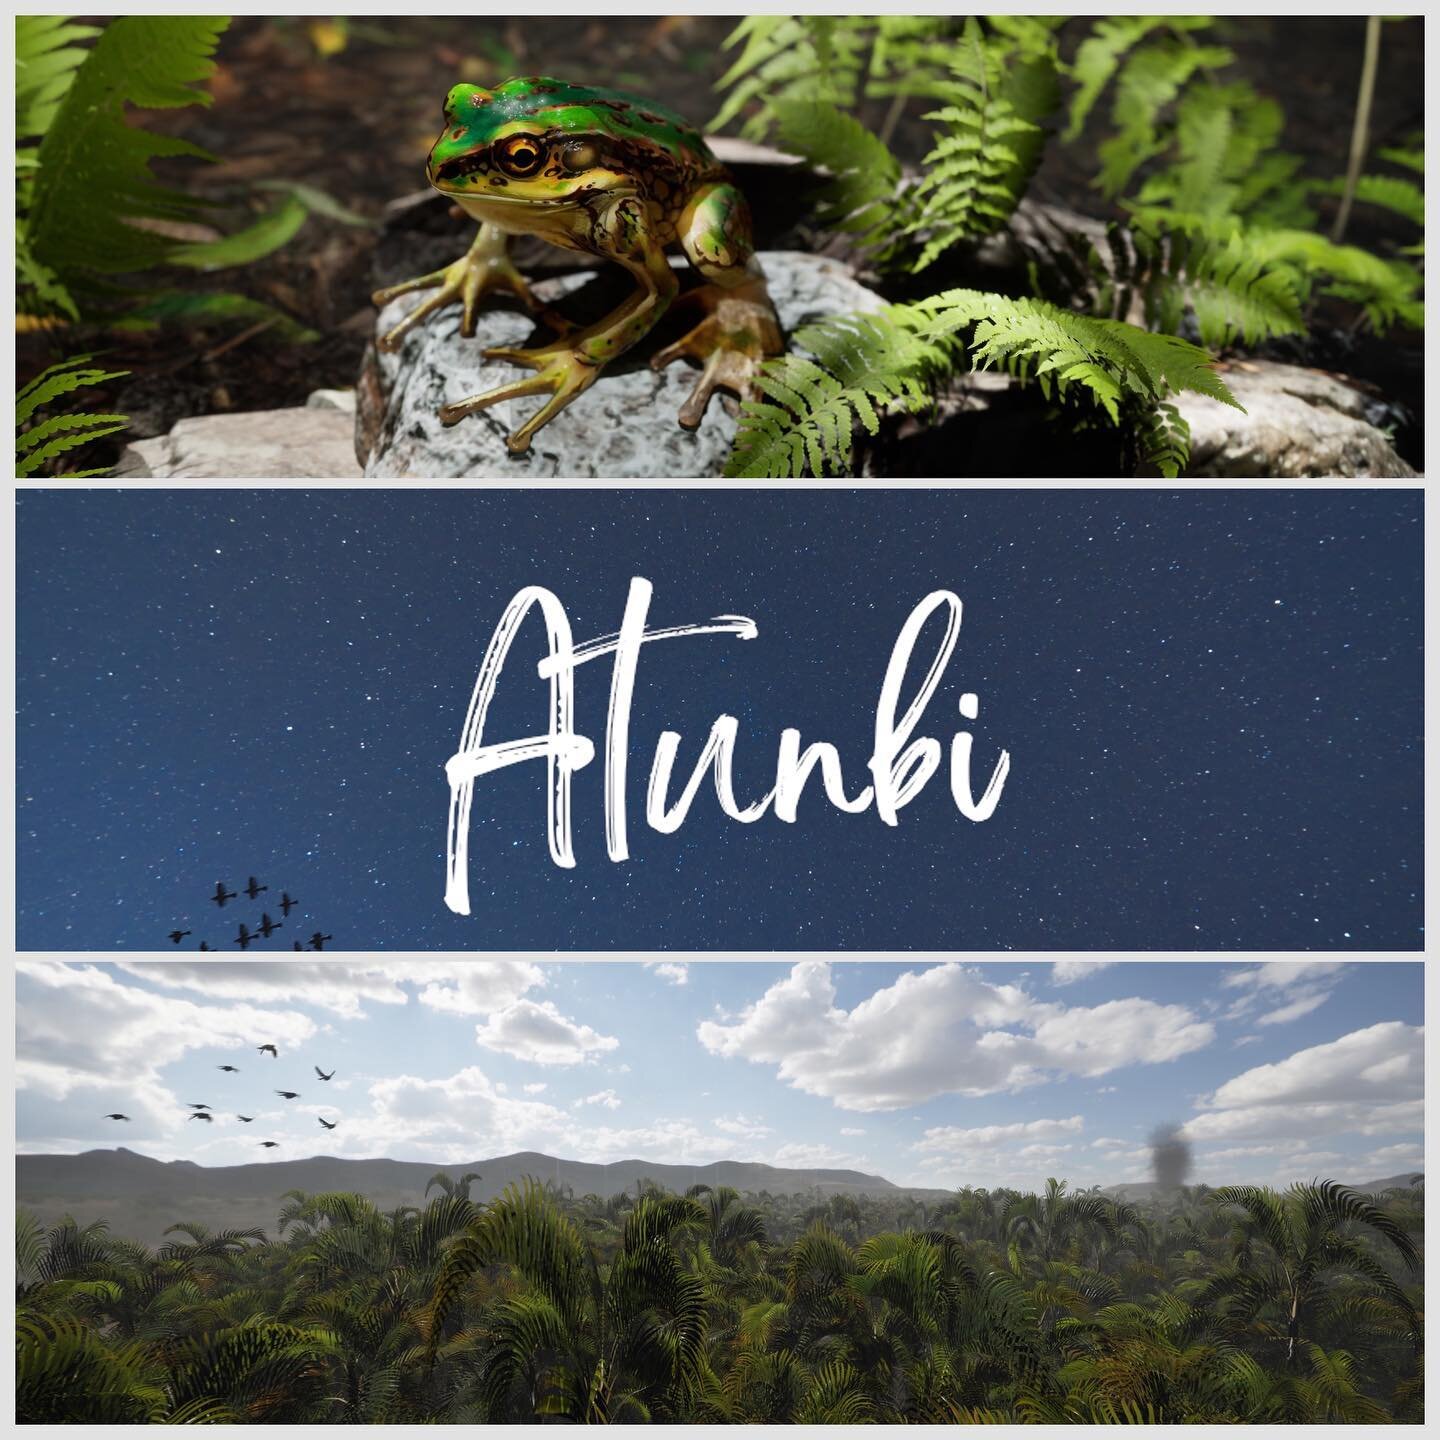 &quot;Atunbi&quot; - An Unreal Engine 5.1 Animated Short 

I'm excited to share a few frames from my latest Unreal Engine cinematic short, &quot;Atunbi&quot;. It is inspired by a soon-to-be-released book and animated series called &quot;Neo &amp; Nub